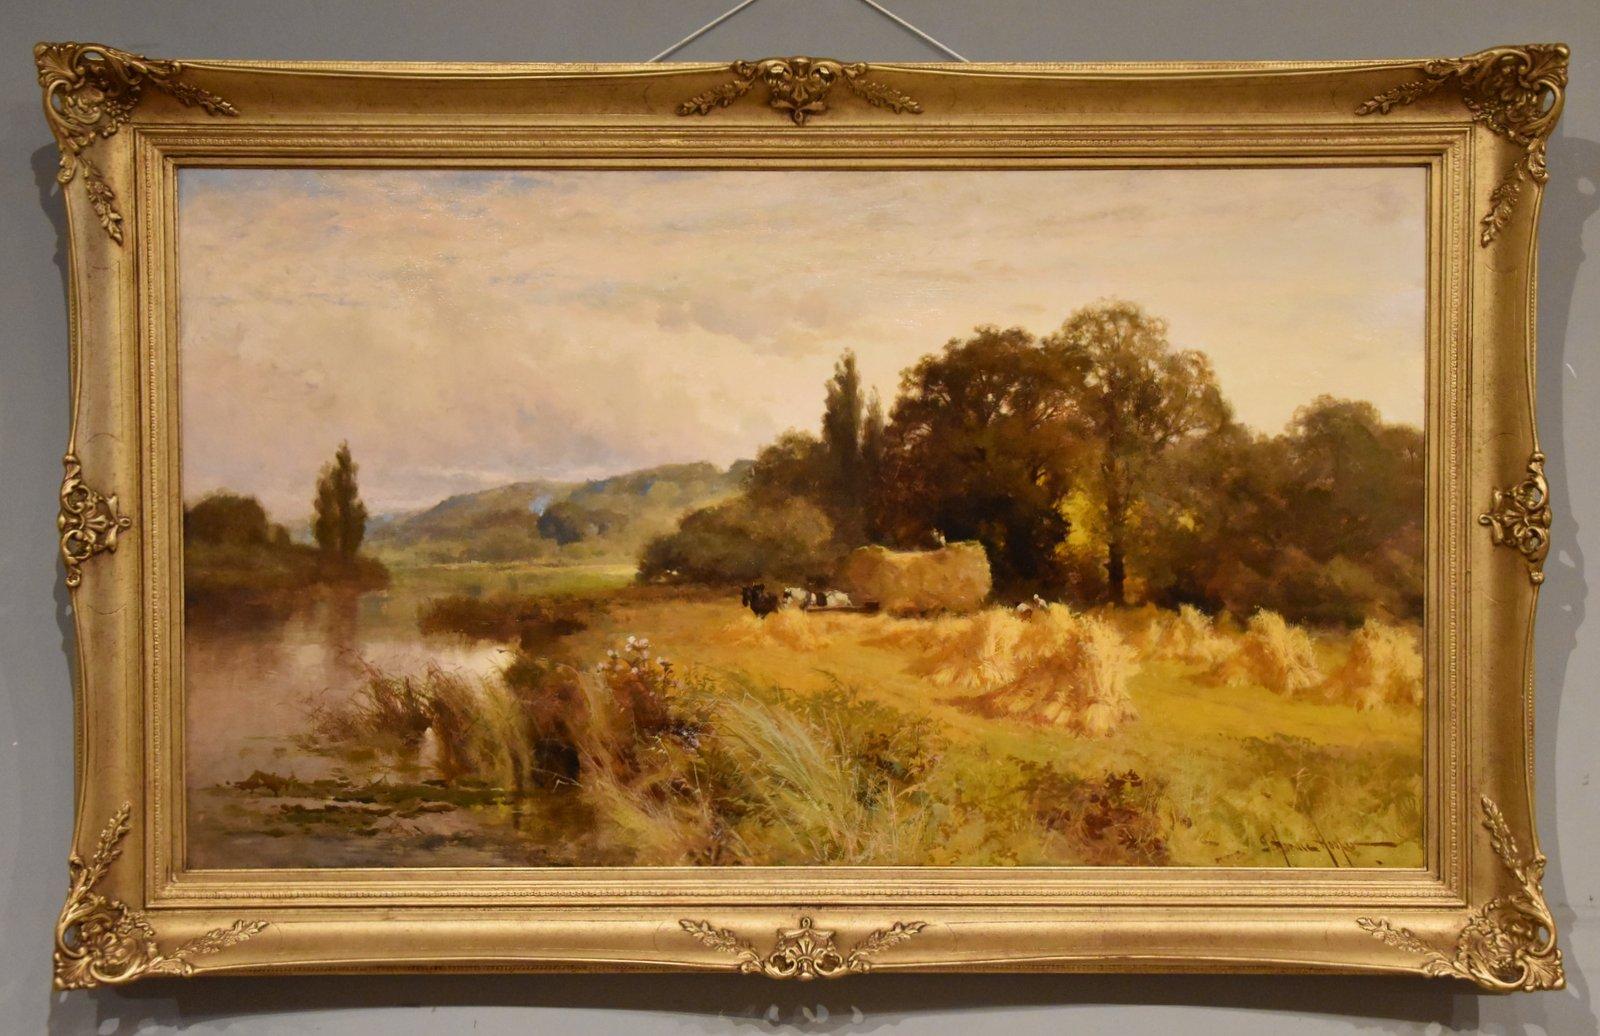 Oil Painting by John Horace Hooper "Harvest Time Near Henley" 1851 - 1906 London Painter of atmospheric landscapes of rural England. Exhibited at he Royal Academy, Liverpool and Royal Hibernian Academy Dublin. Oil on canvas. Signed 

Dimensions